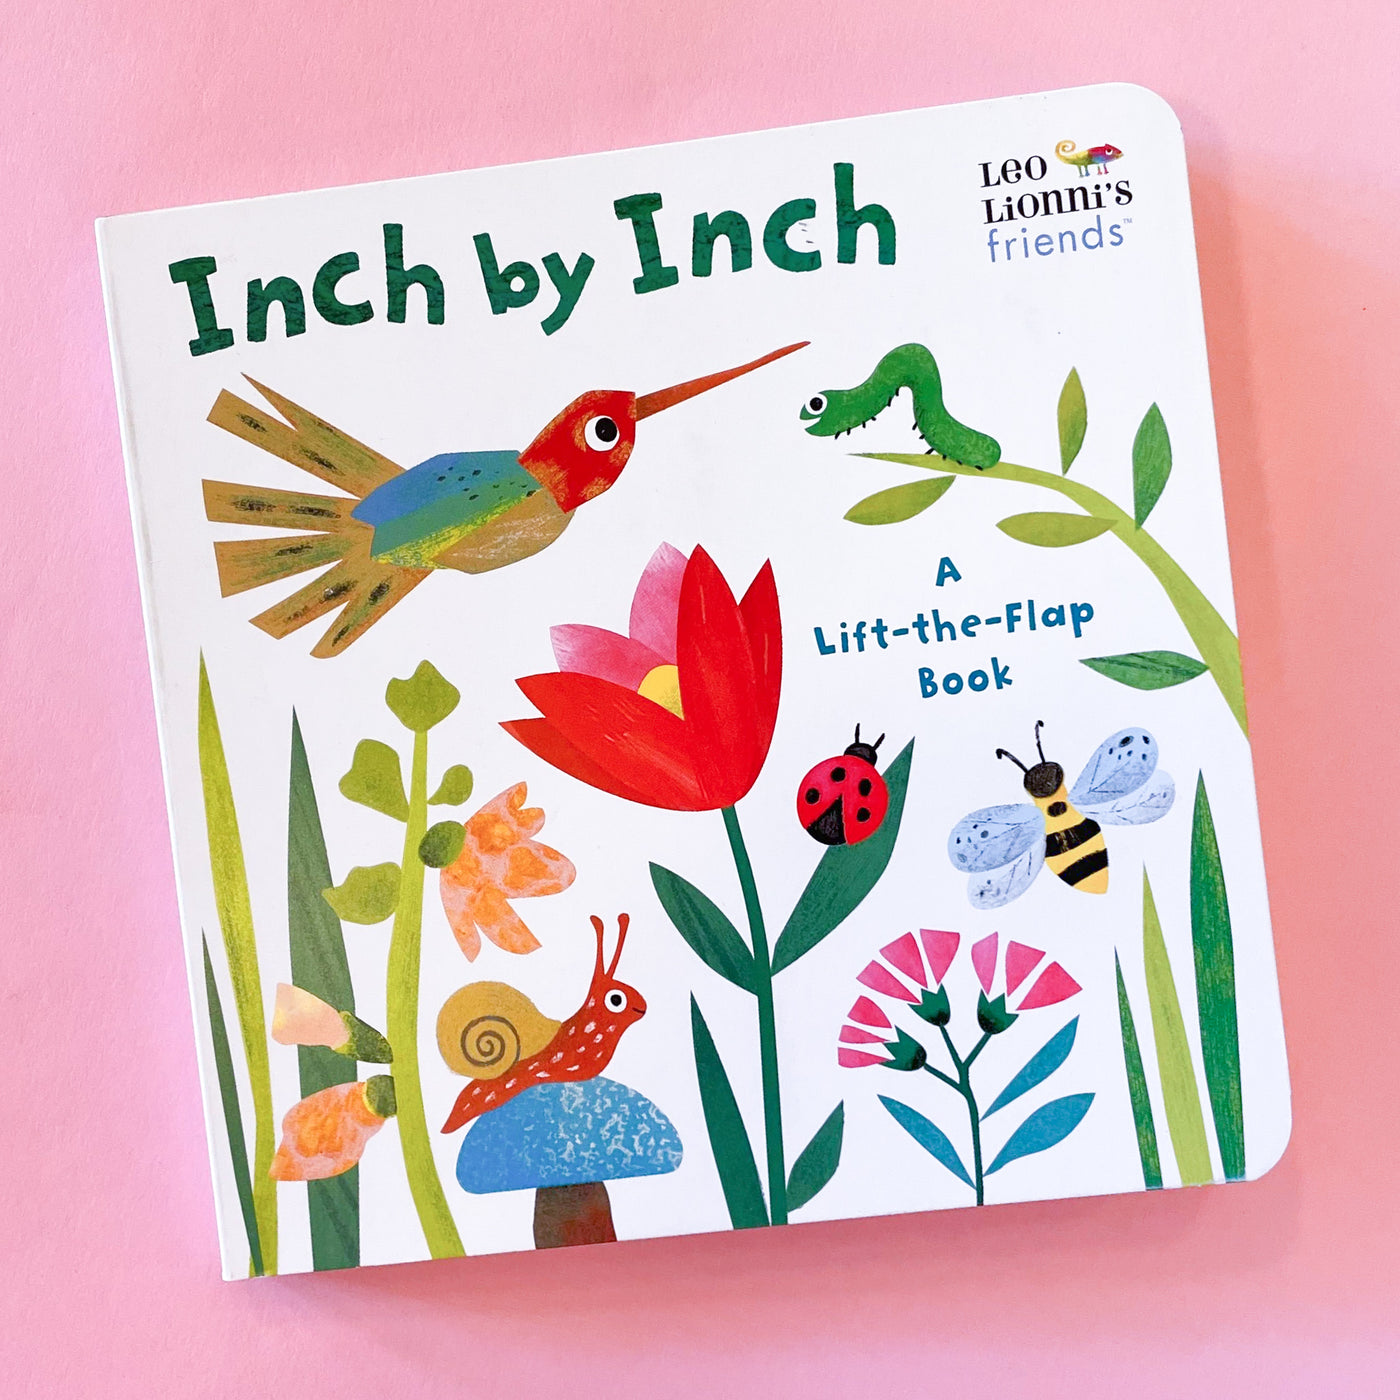 Inch by Inch: A Lift-the-Flap Book (Leo Lionni's Friends) by Leo Lionni and Jan Gerardi